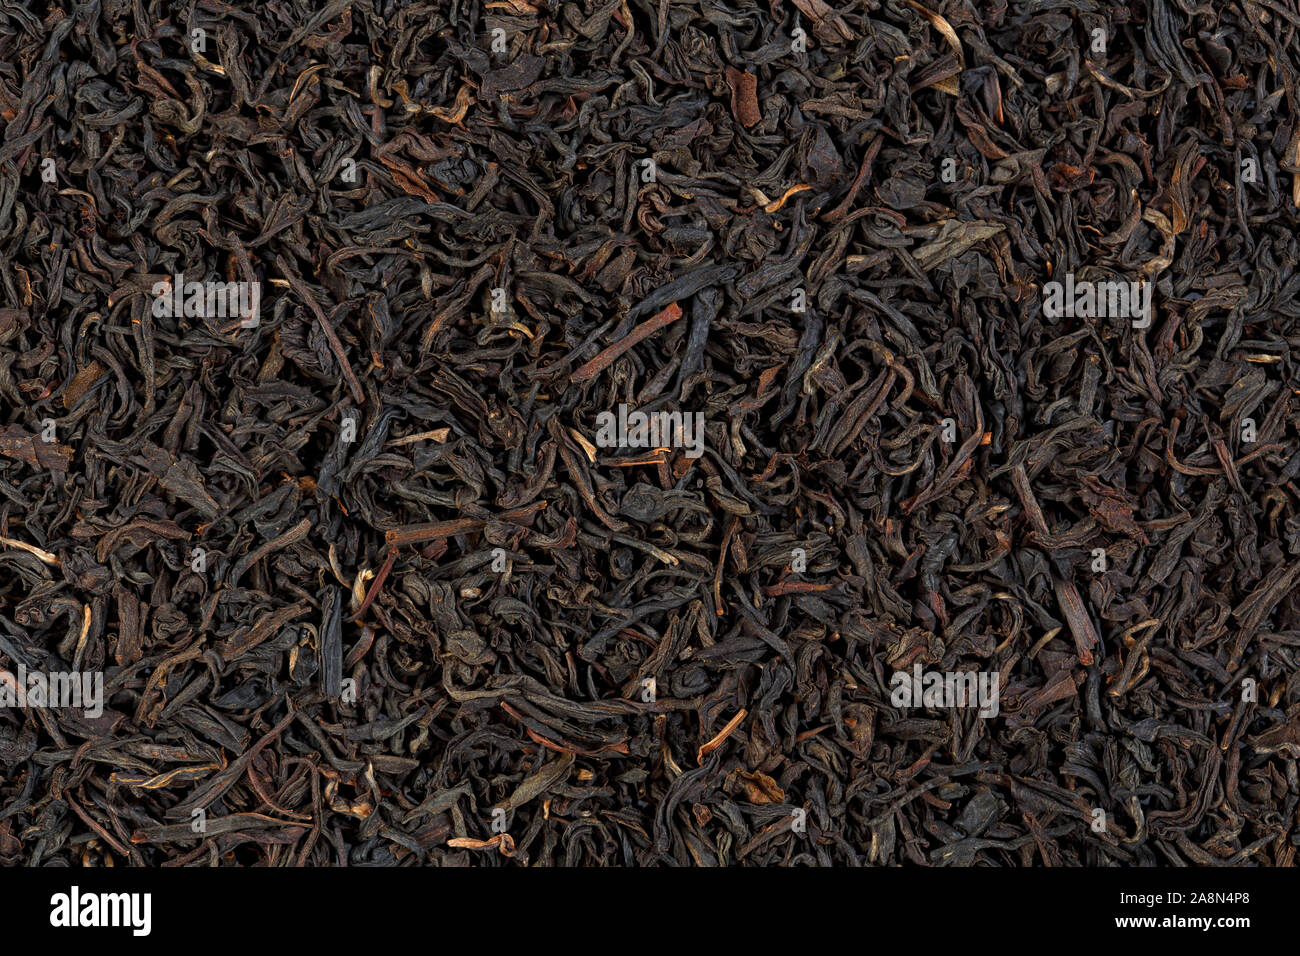 Indian Assam tea. Can be used as background. Stock Photo